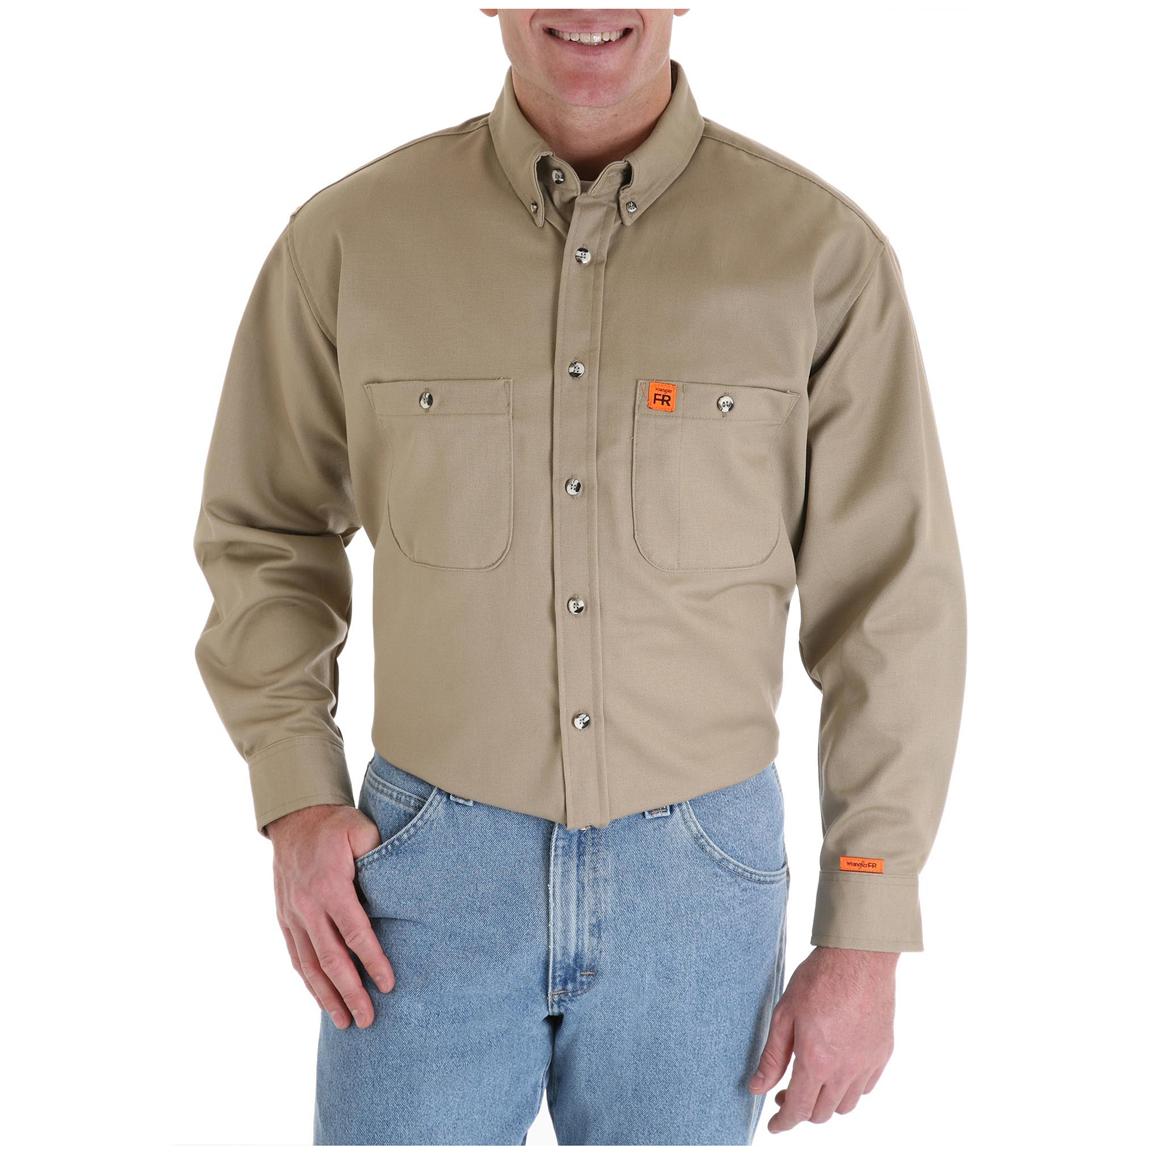 Men's Riggs® Flame-Resistant Work Shirt - 220024, Shirts at Sportsman's ...